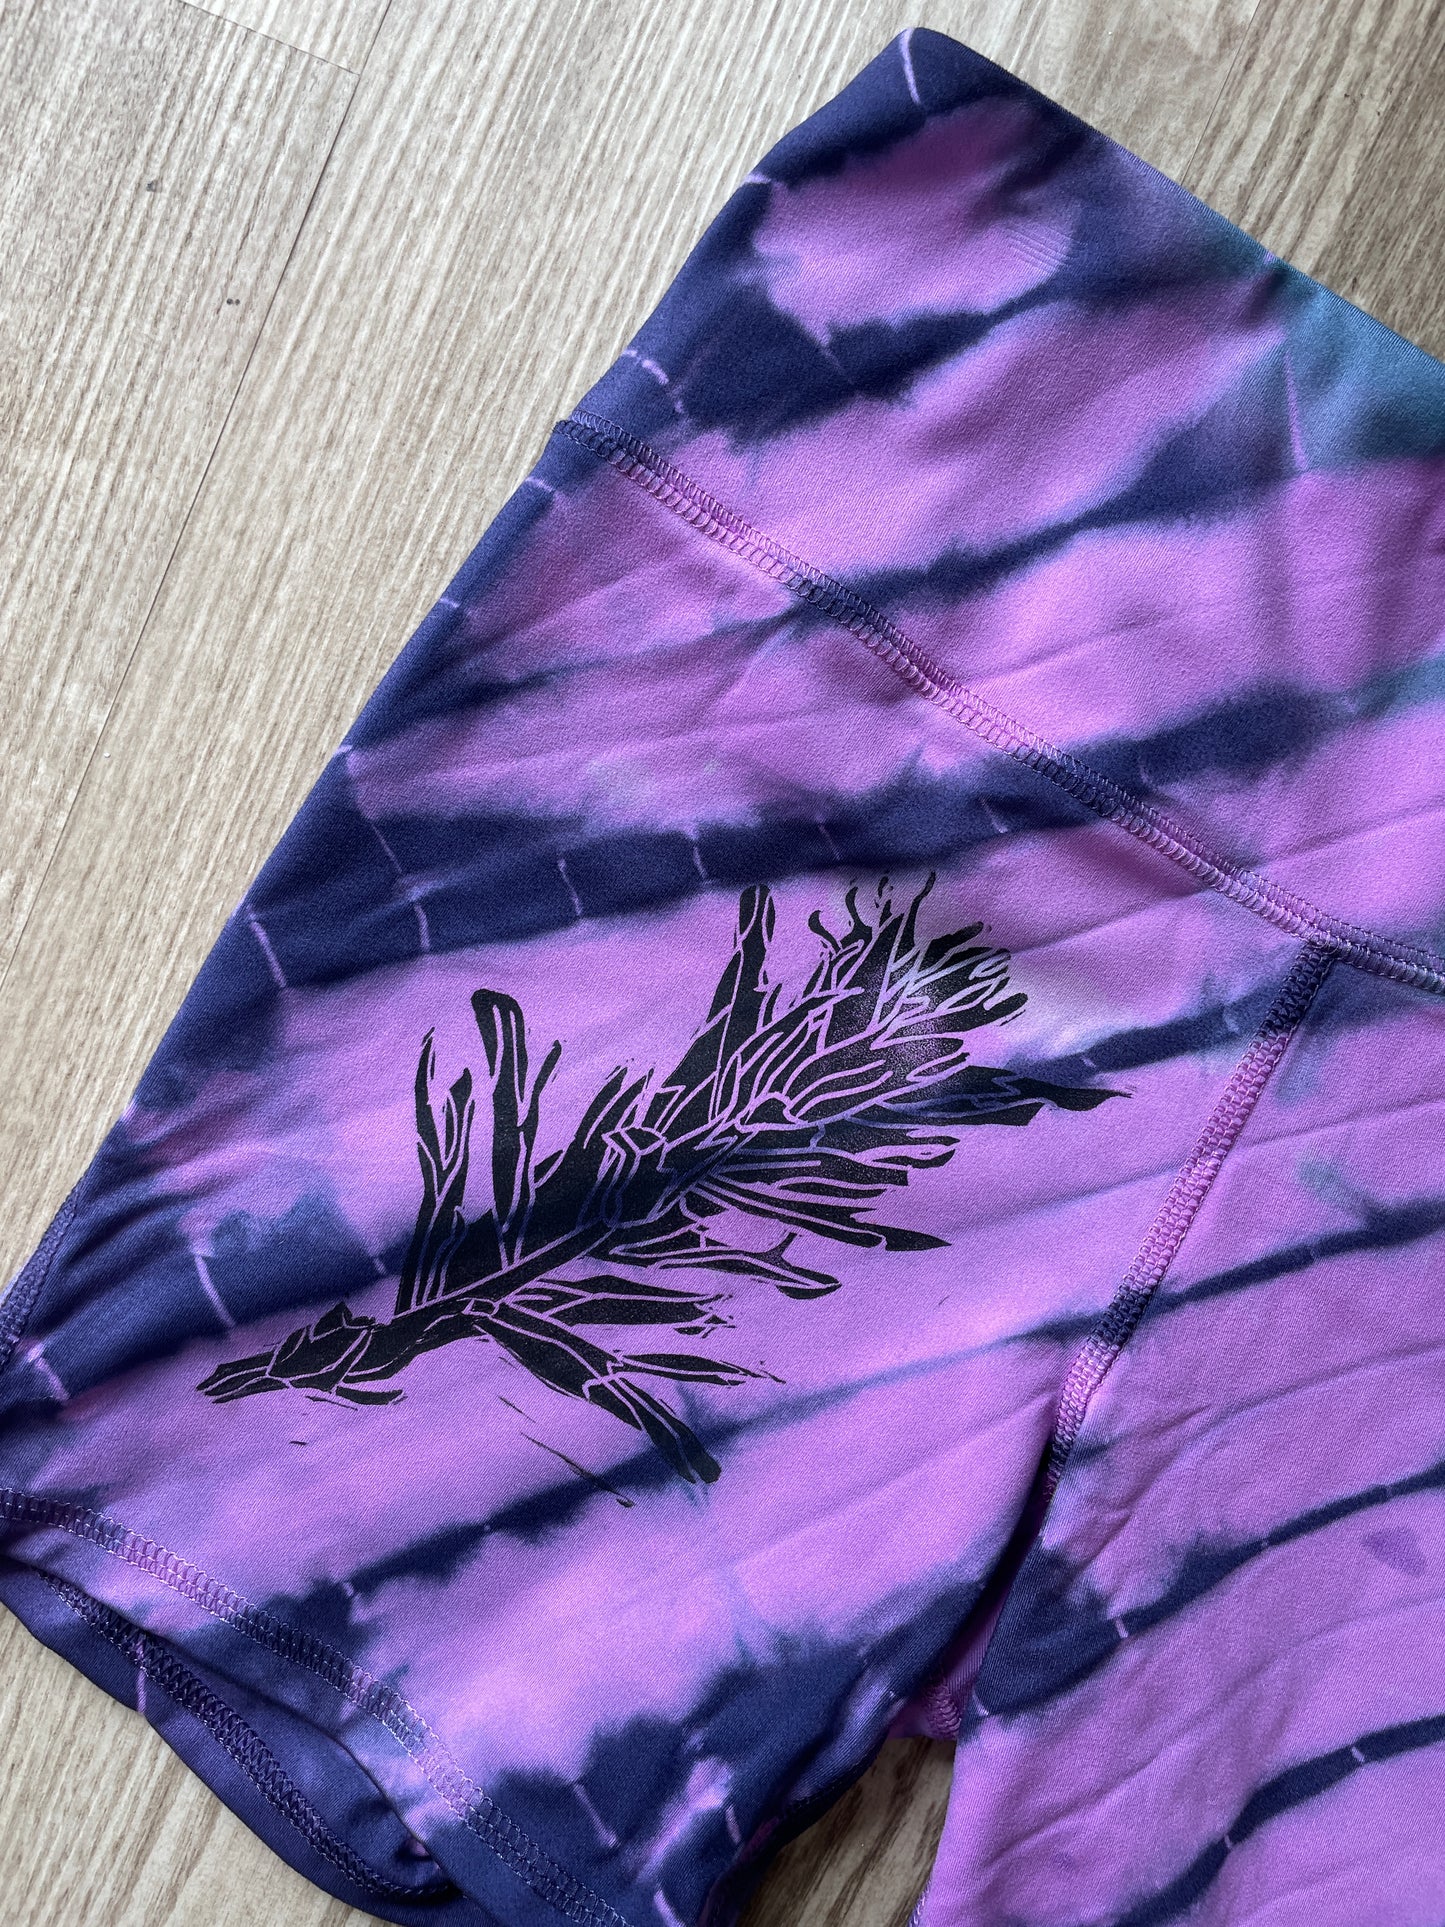 SMALL Women's Handprinted Indian Paintbrush Tie Dye Bike Shorts | One-Of-a-Kind Upcycled Pink and Blue 5-inch Spandex Shorts